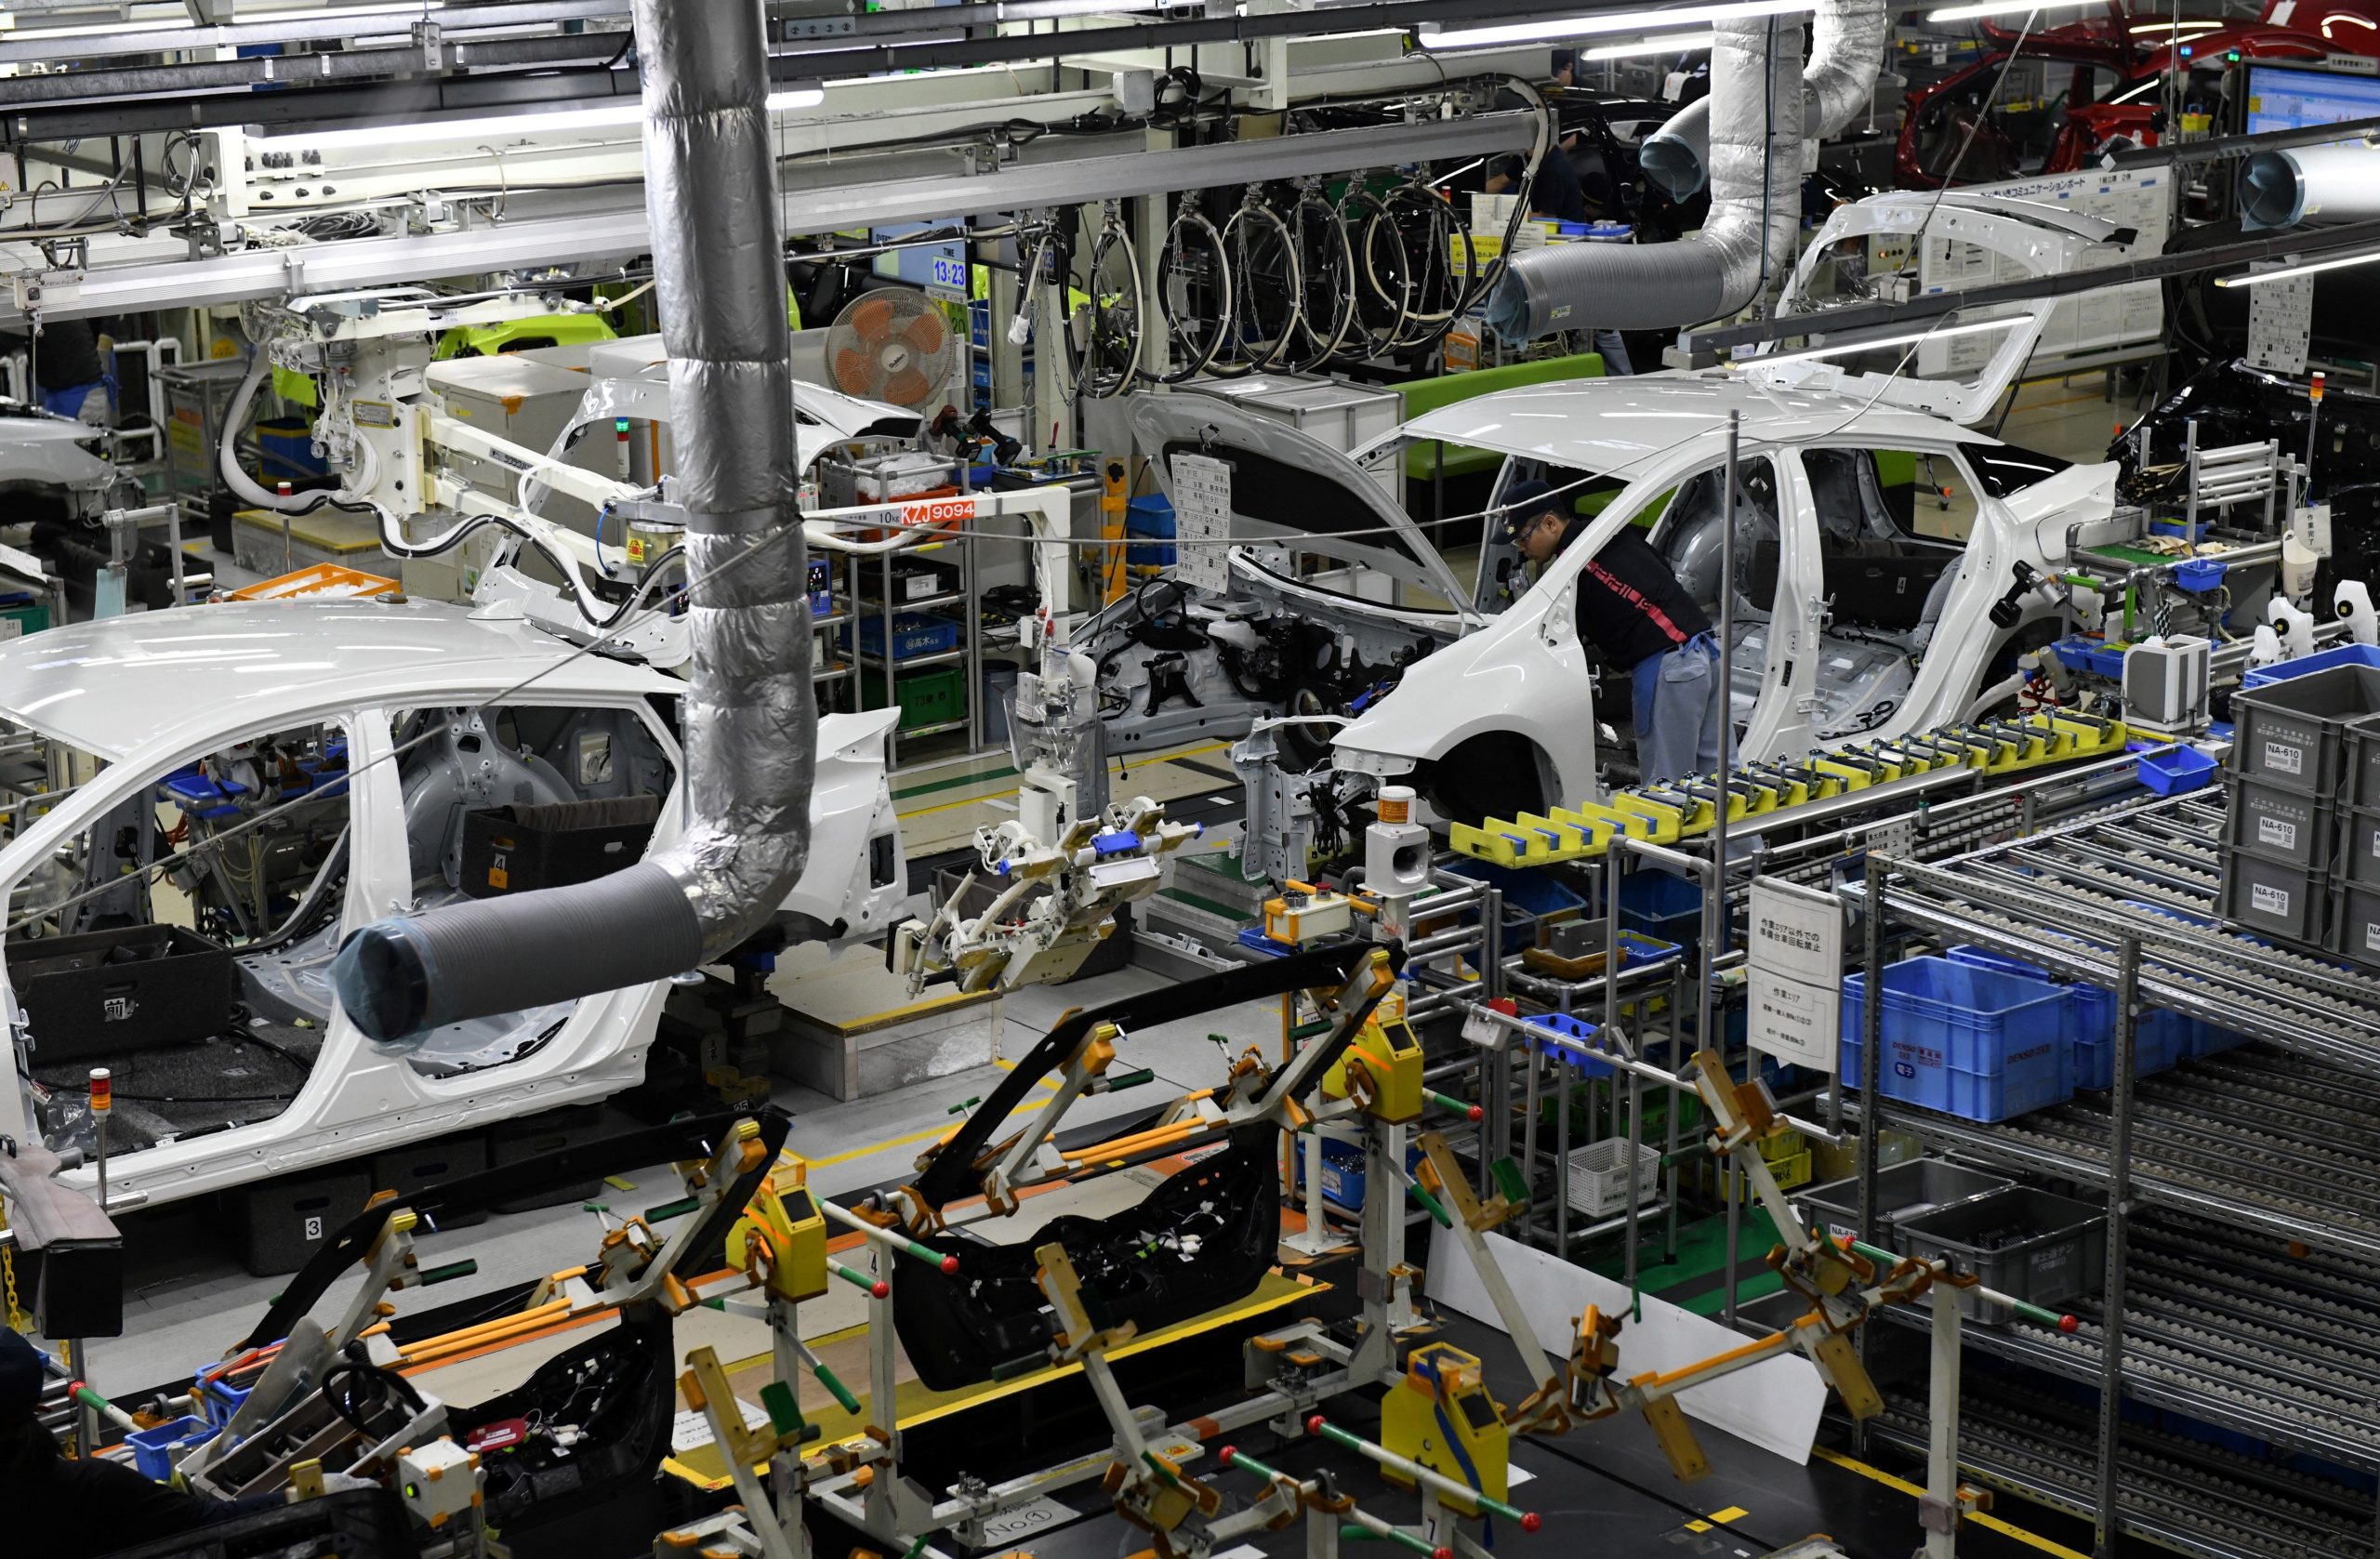 This December 8, 2017 picture shows workers assembling fourth generation Toyota Prius cars on the production line at the company's Tsutsumi assembly plant in Toyota City, Aichi prefecture. (Photo credit TOSHIFUMI KITAMURA/AFP via Getty Images)